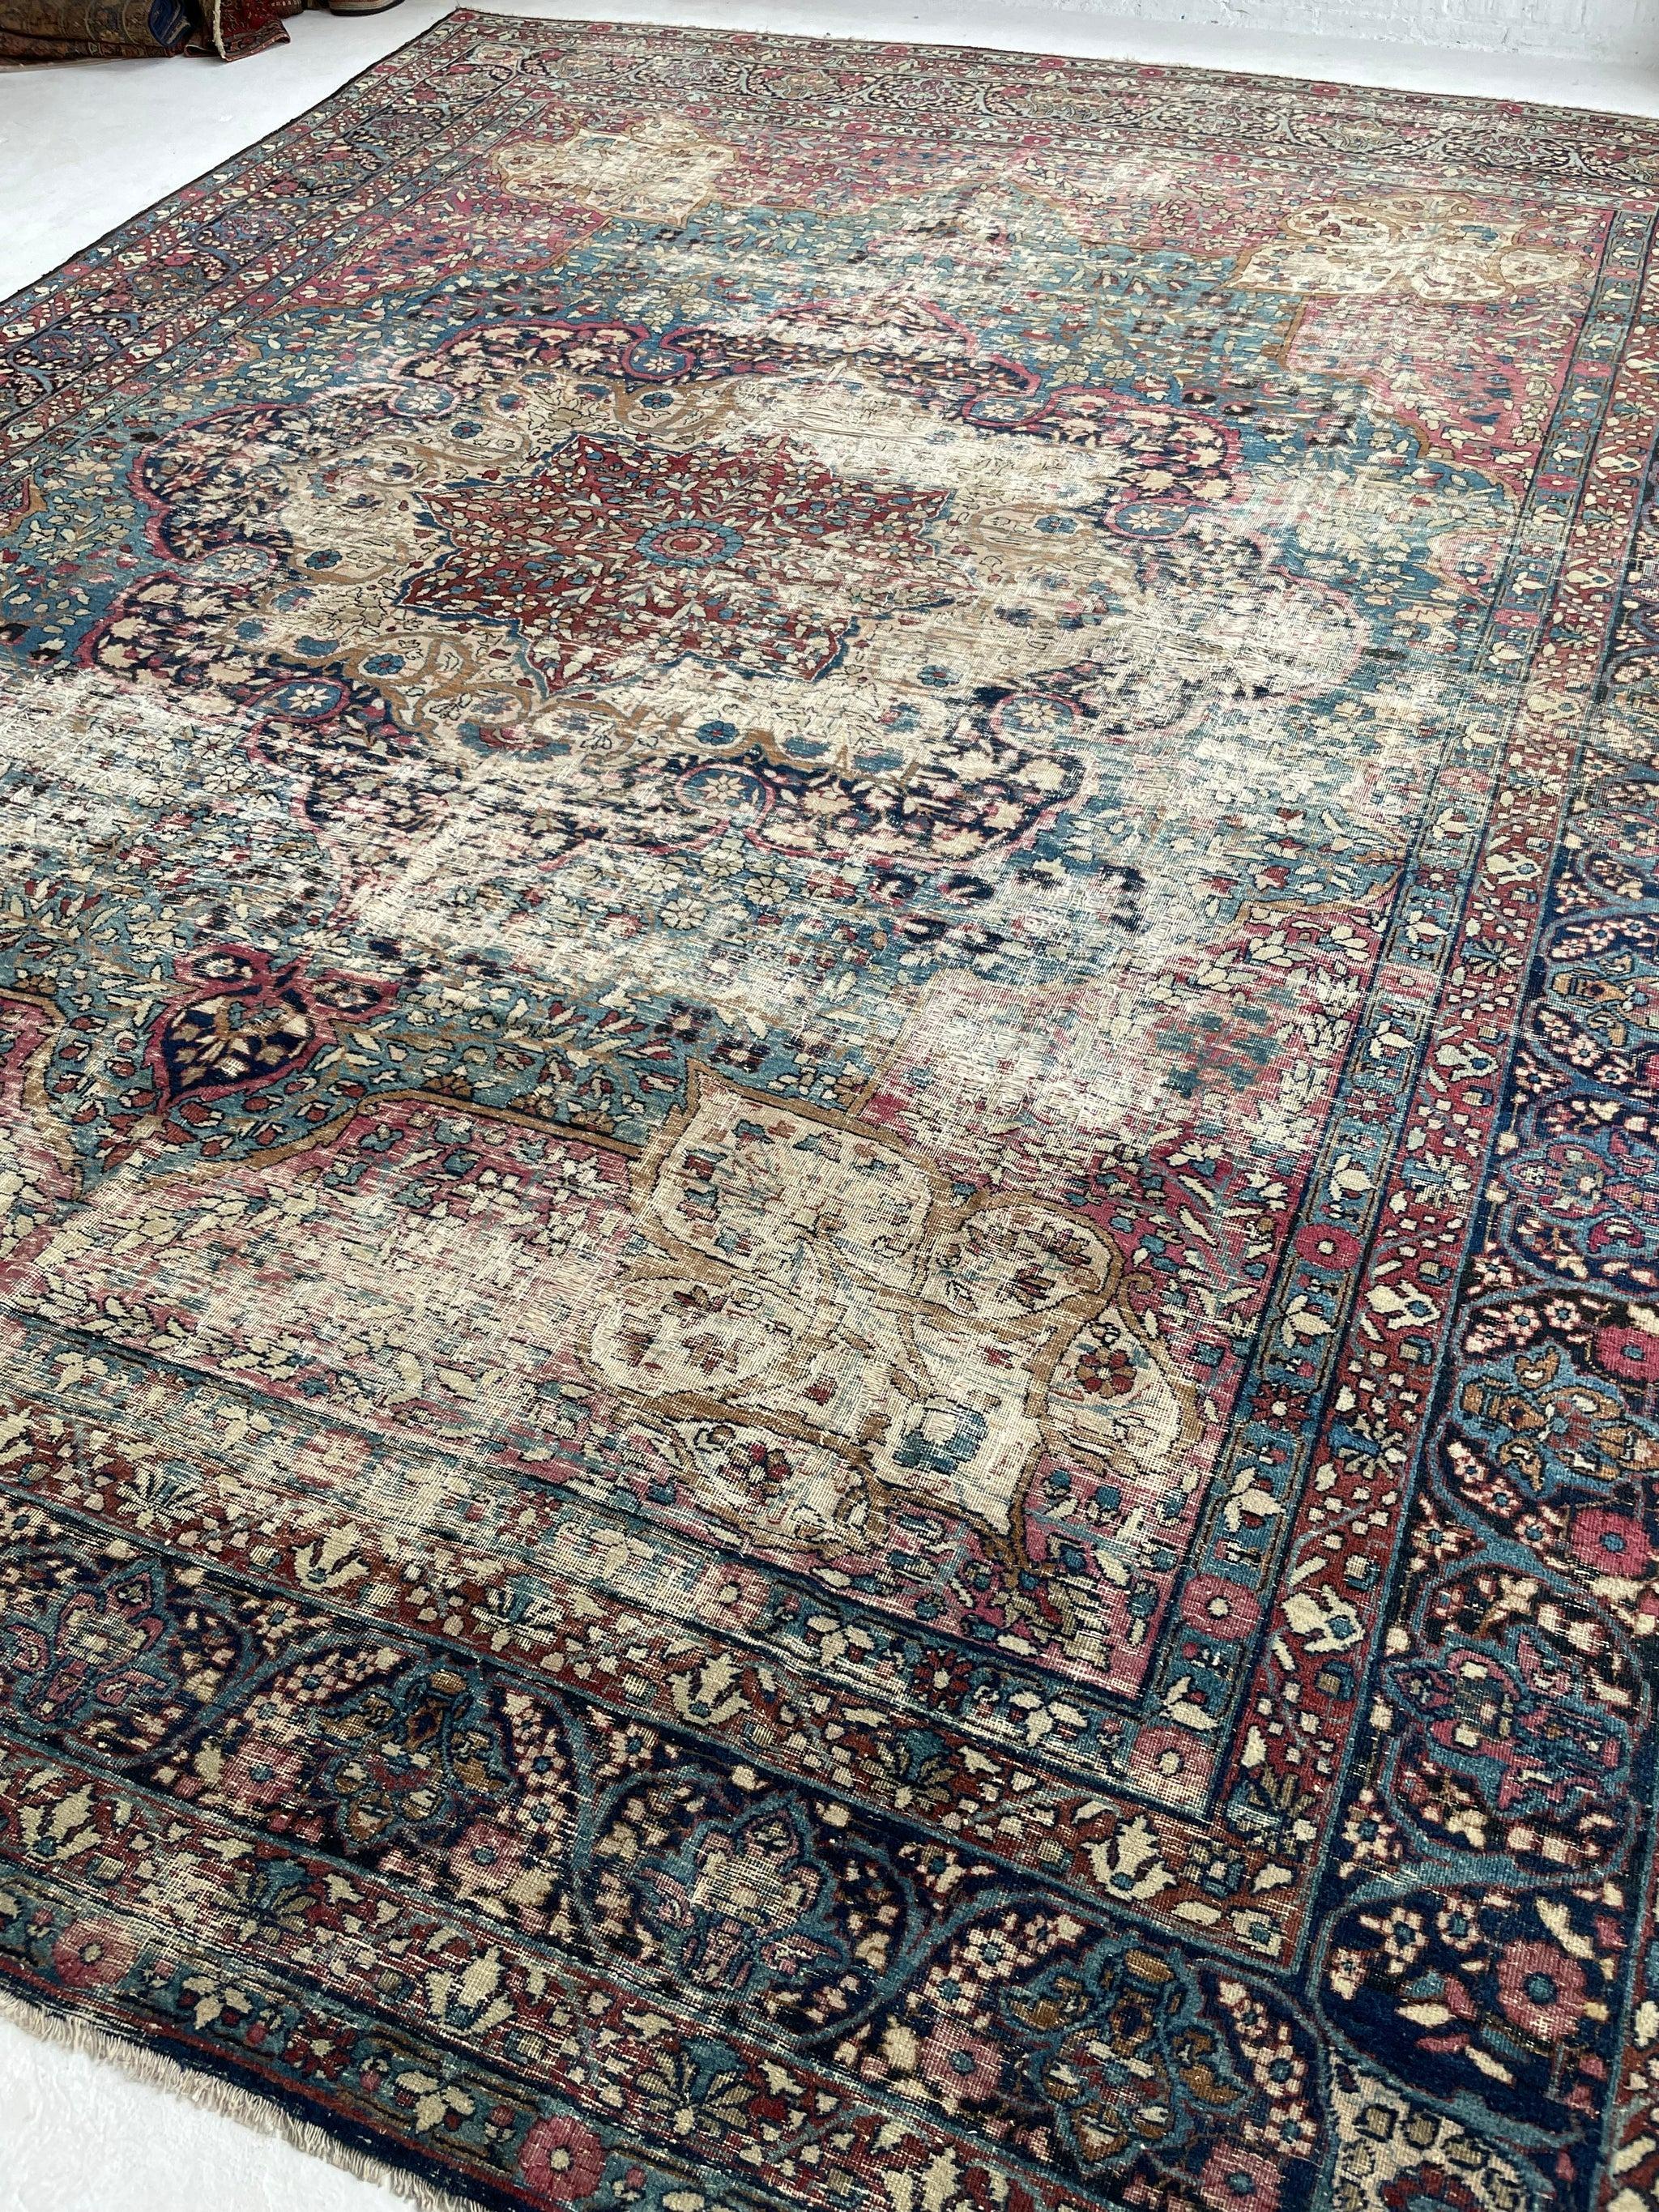 Stunning Antique Persian Kermanshah - Lavar Unique Color Palette - Denim, Ice, Indigo, Berry, Caramel, Copper, Camel

About: The most beautiful 100+-year-old kermanshah-lavar we've ever seen woven in this style. Usually, you don't find them in